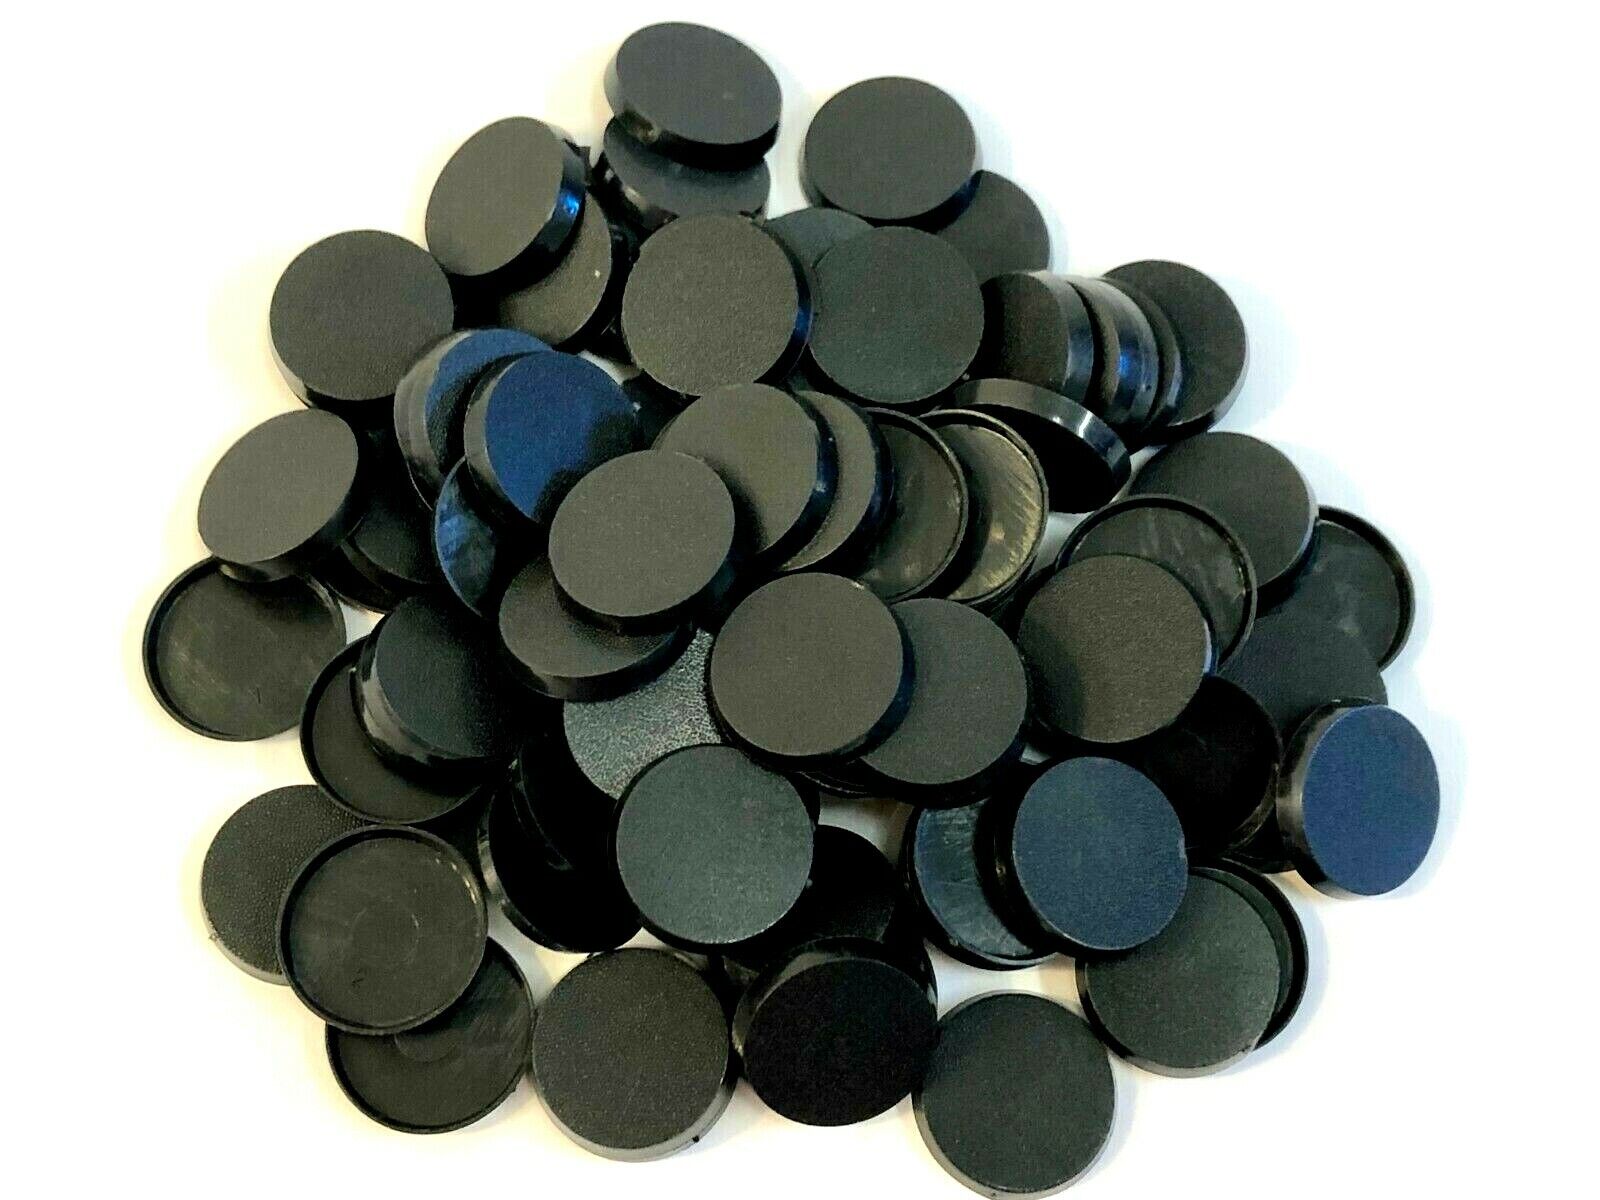 Lot Of 100 32mm Round Bases For Warhammer 40k + AoS Games Workshop Bitz  Unbranded Does not apply